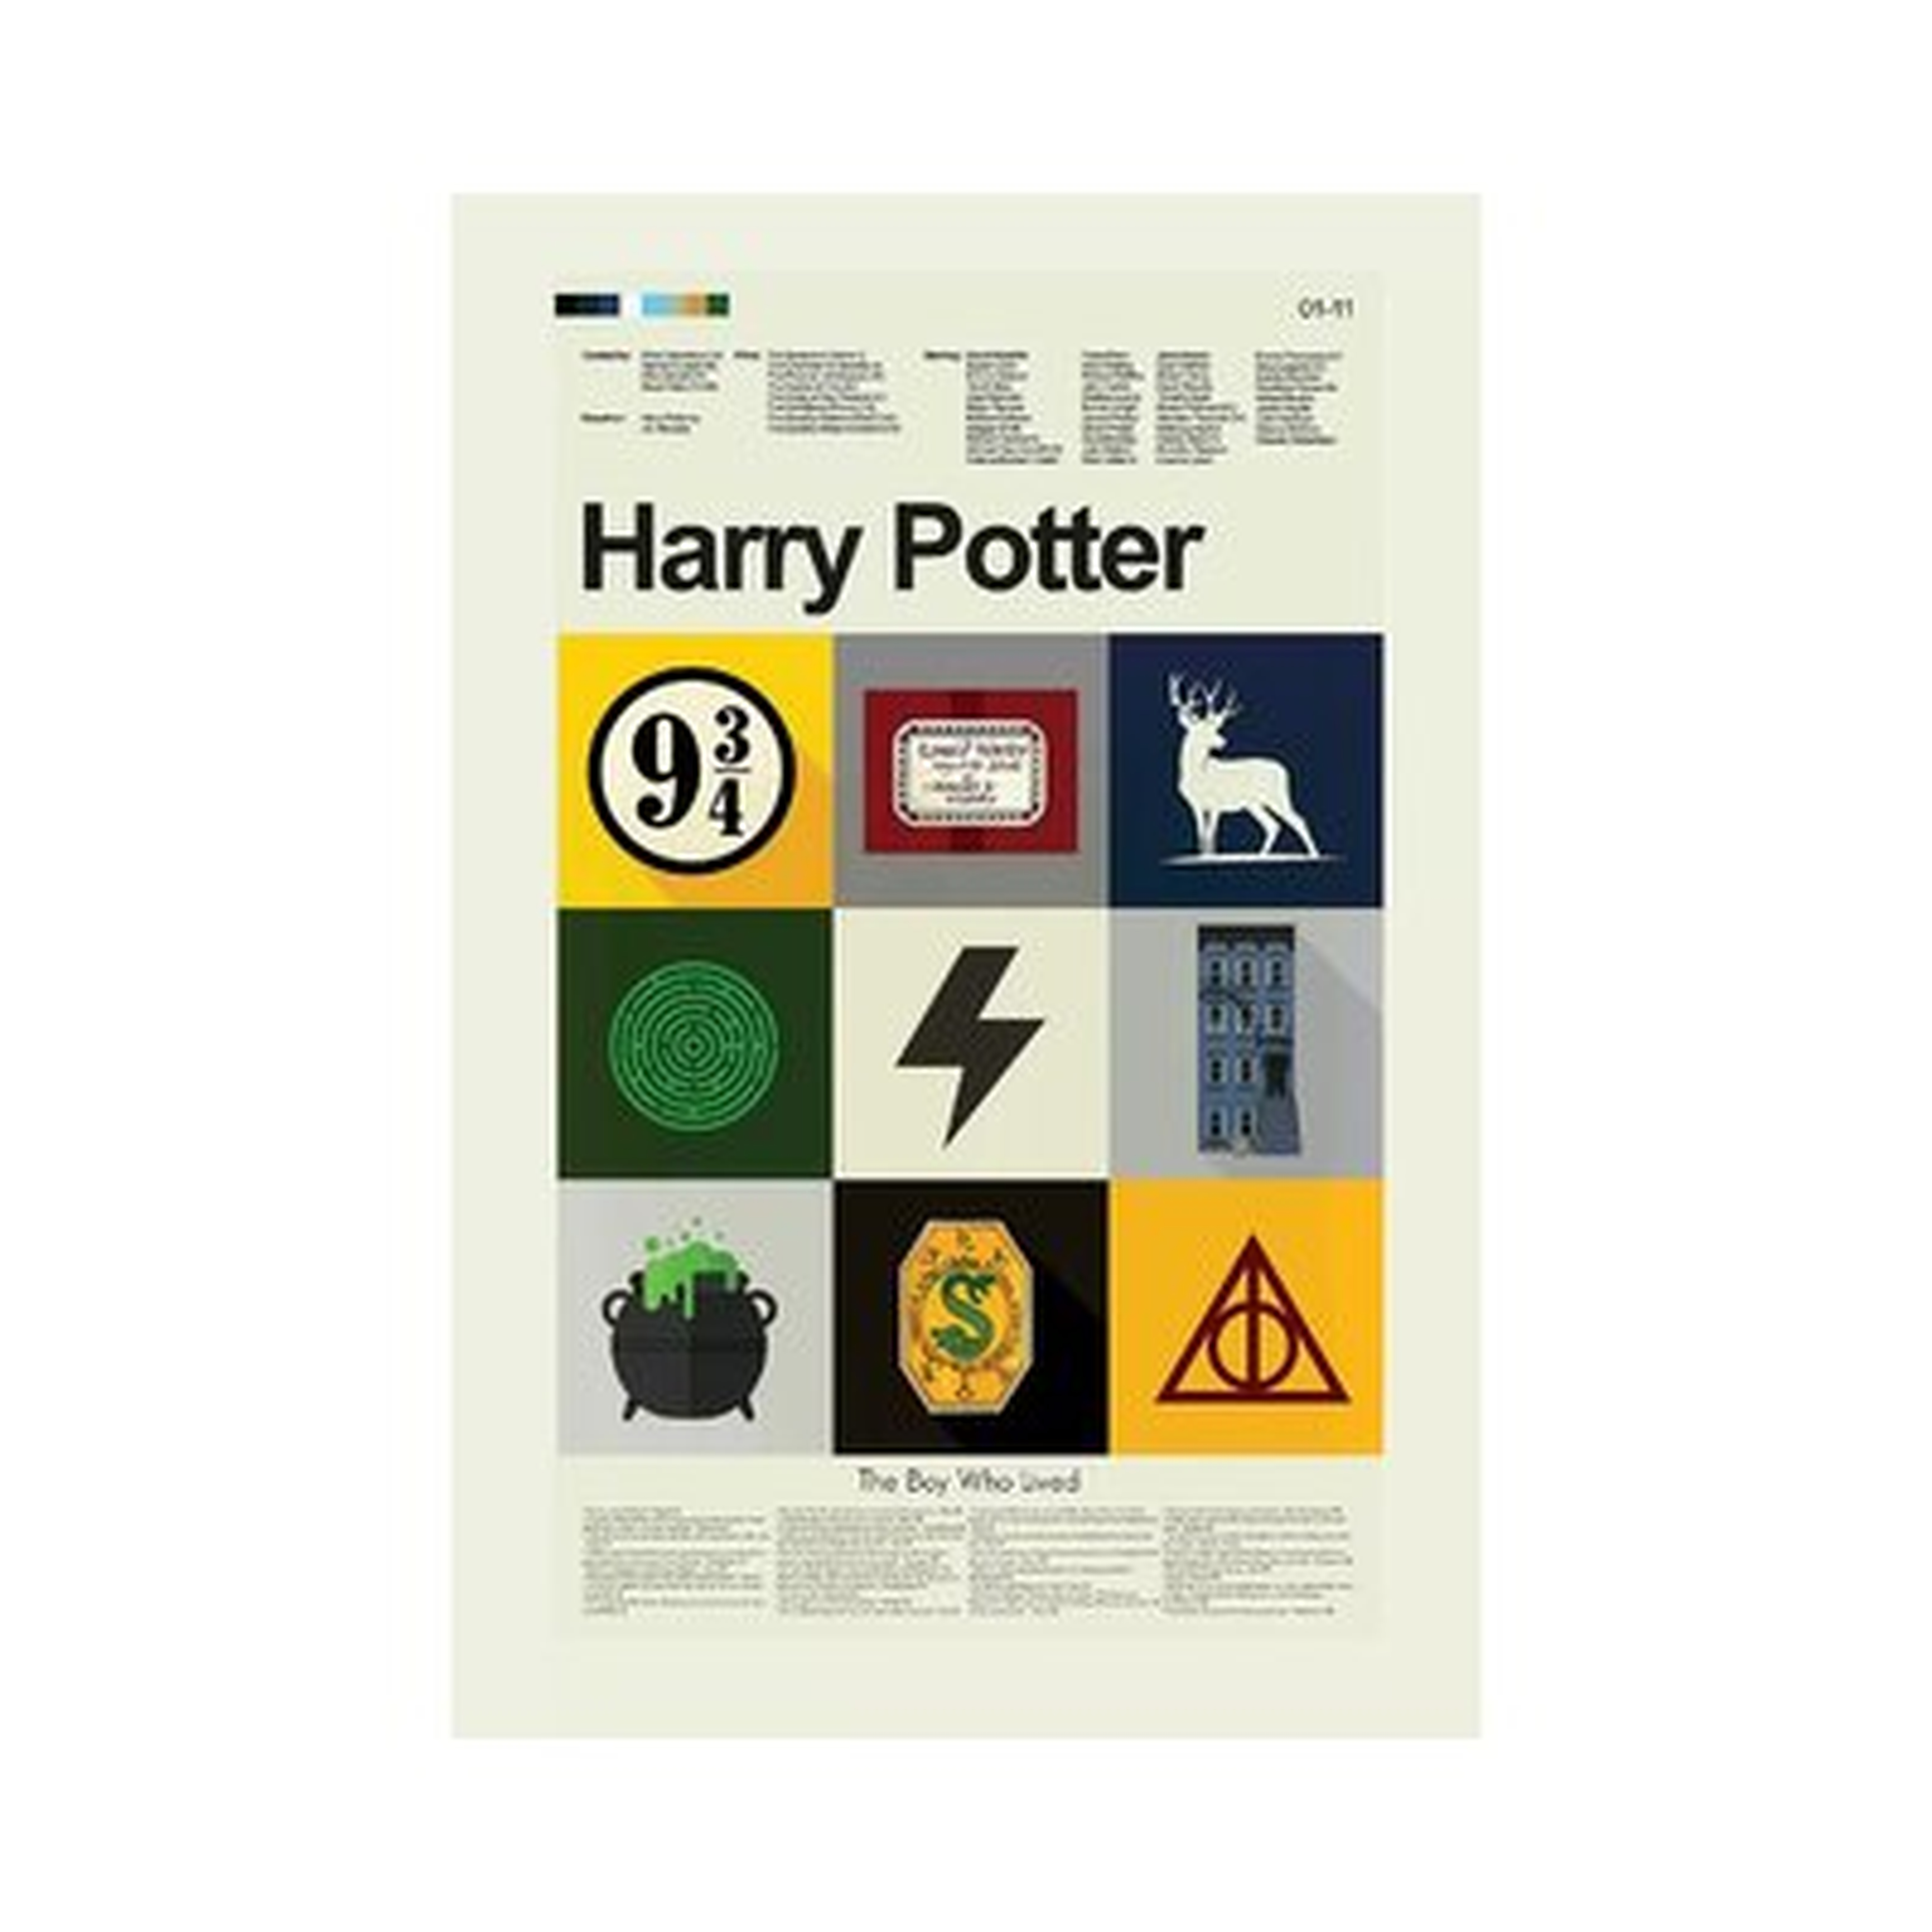 Harry Potter by Erin Hagerman - Wrapped Canvas Graphic Art Print - Wayfair